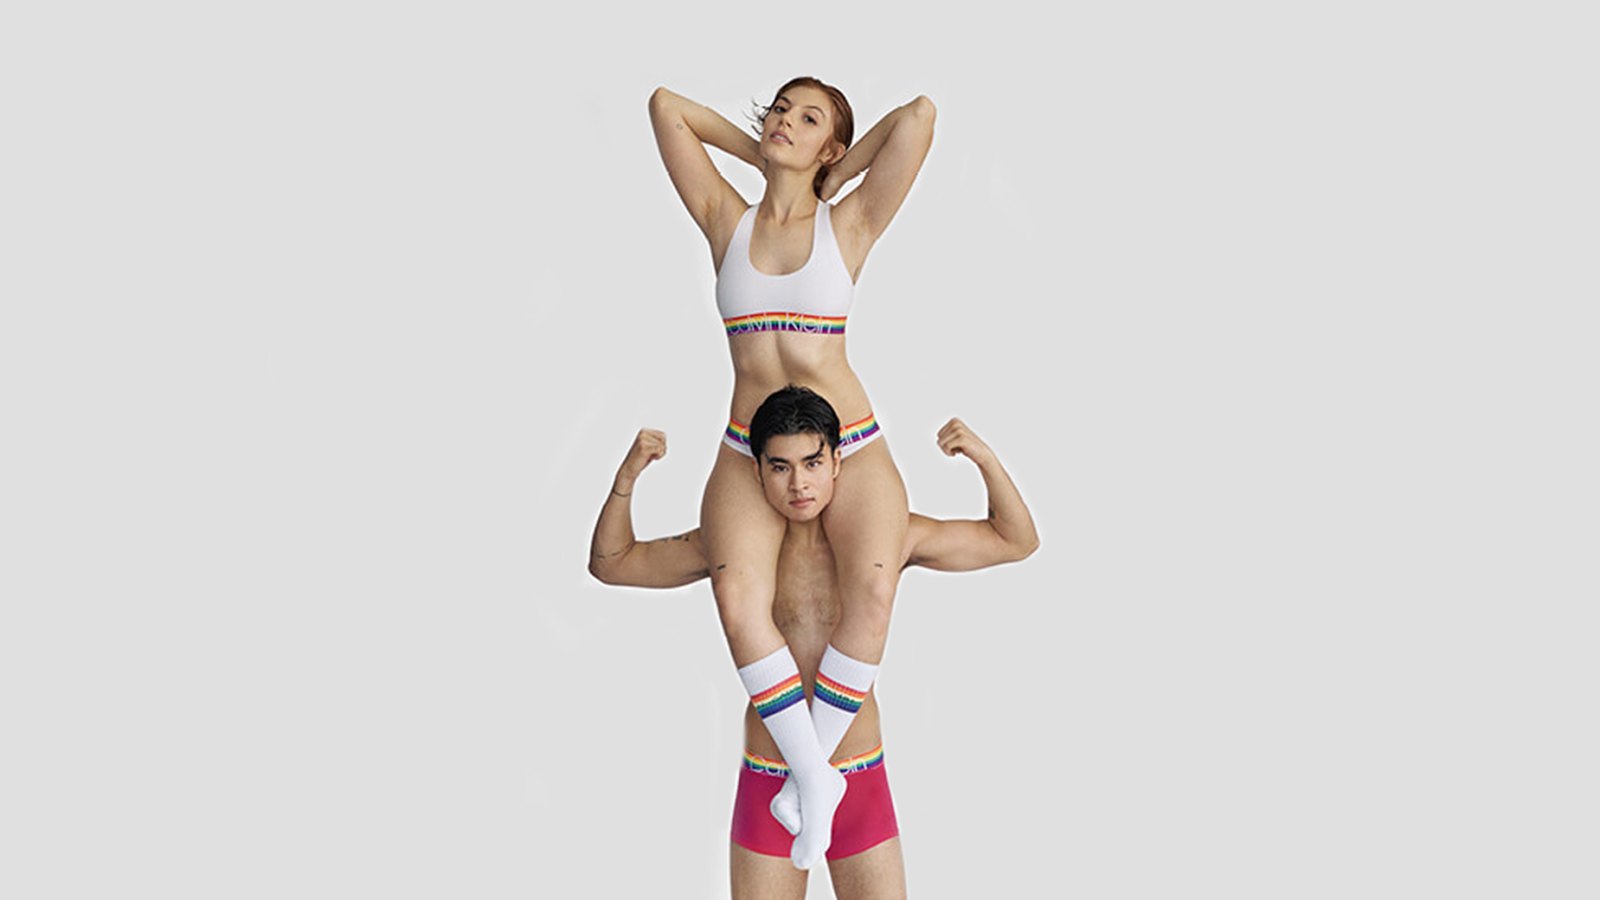 MaryV and Chella Man wearing pieces from Calvin Klein's Pride 2020 Collection.